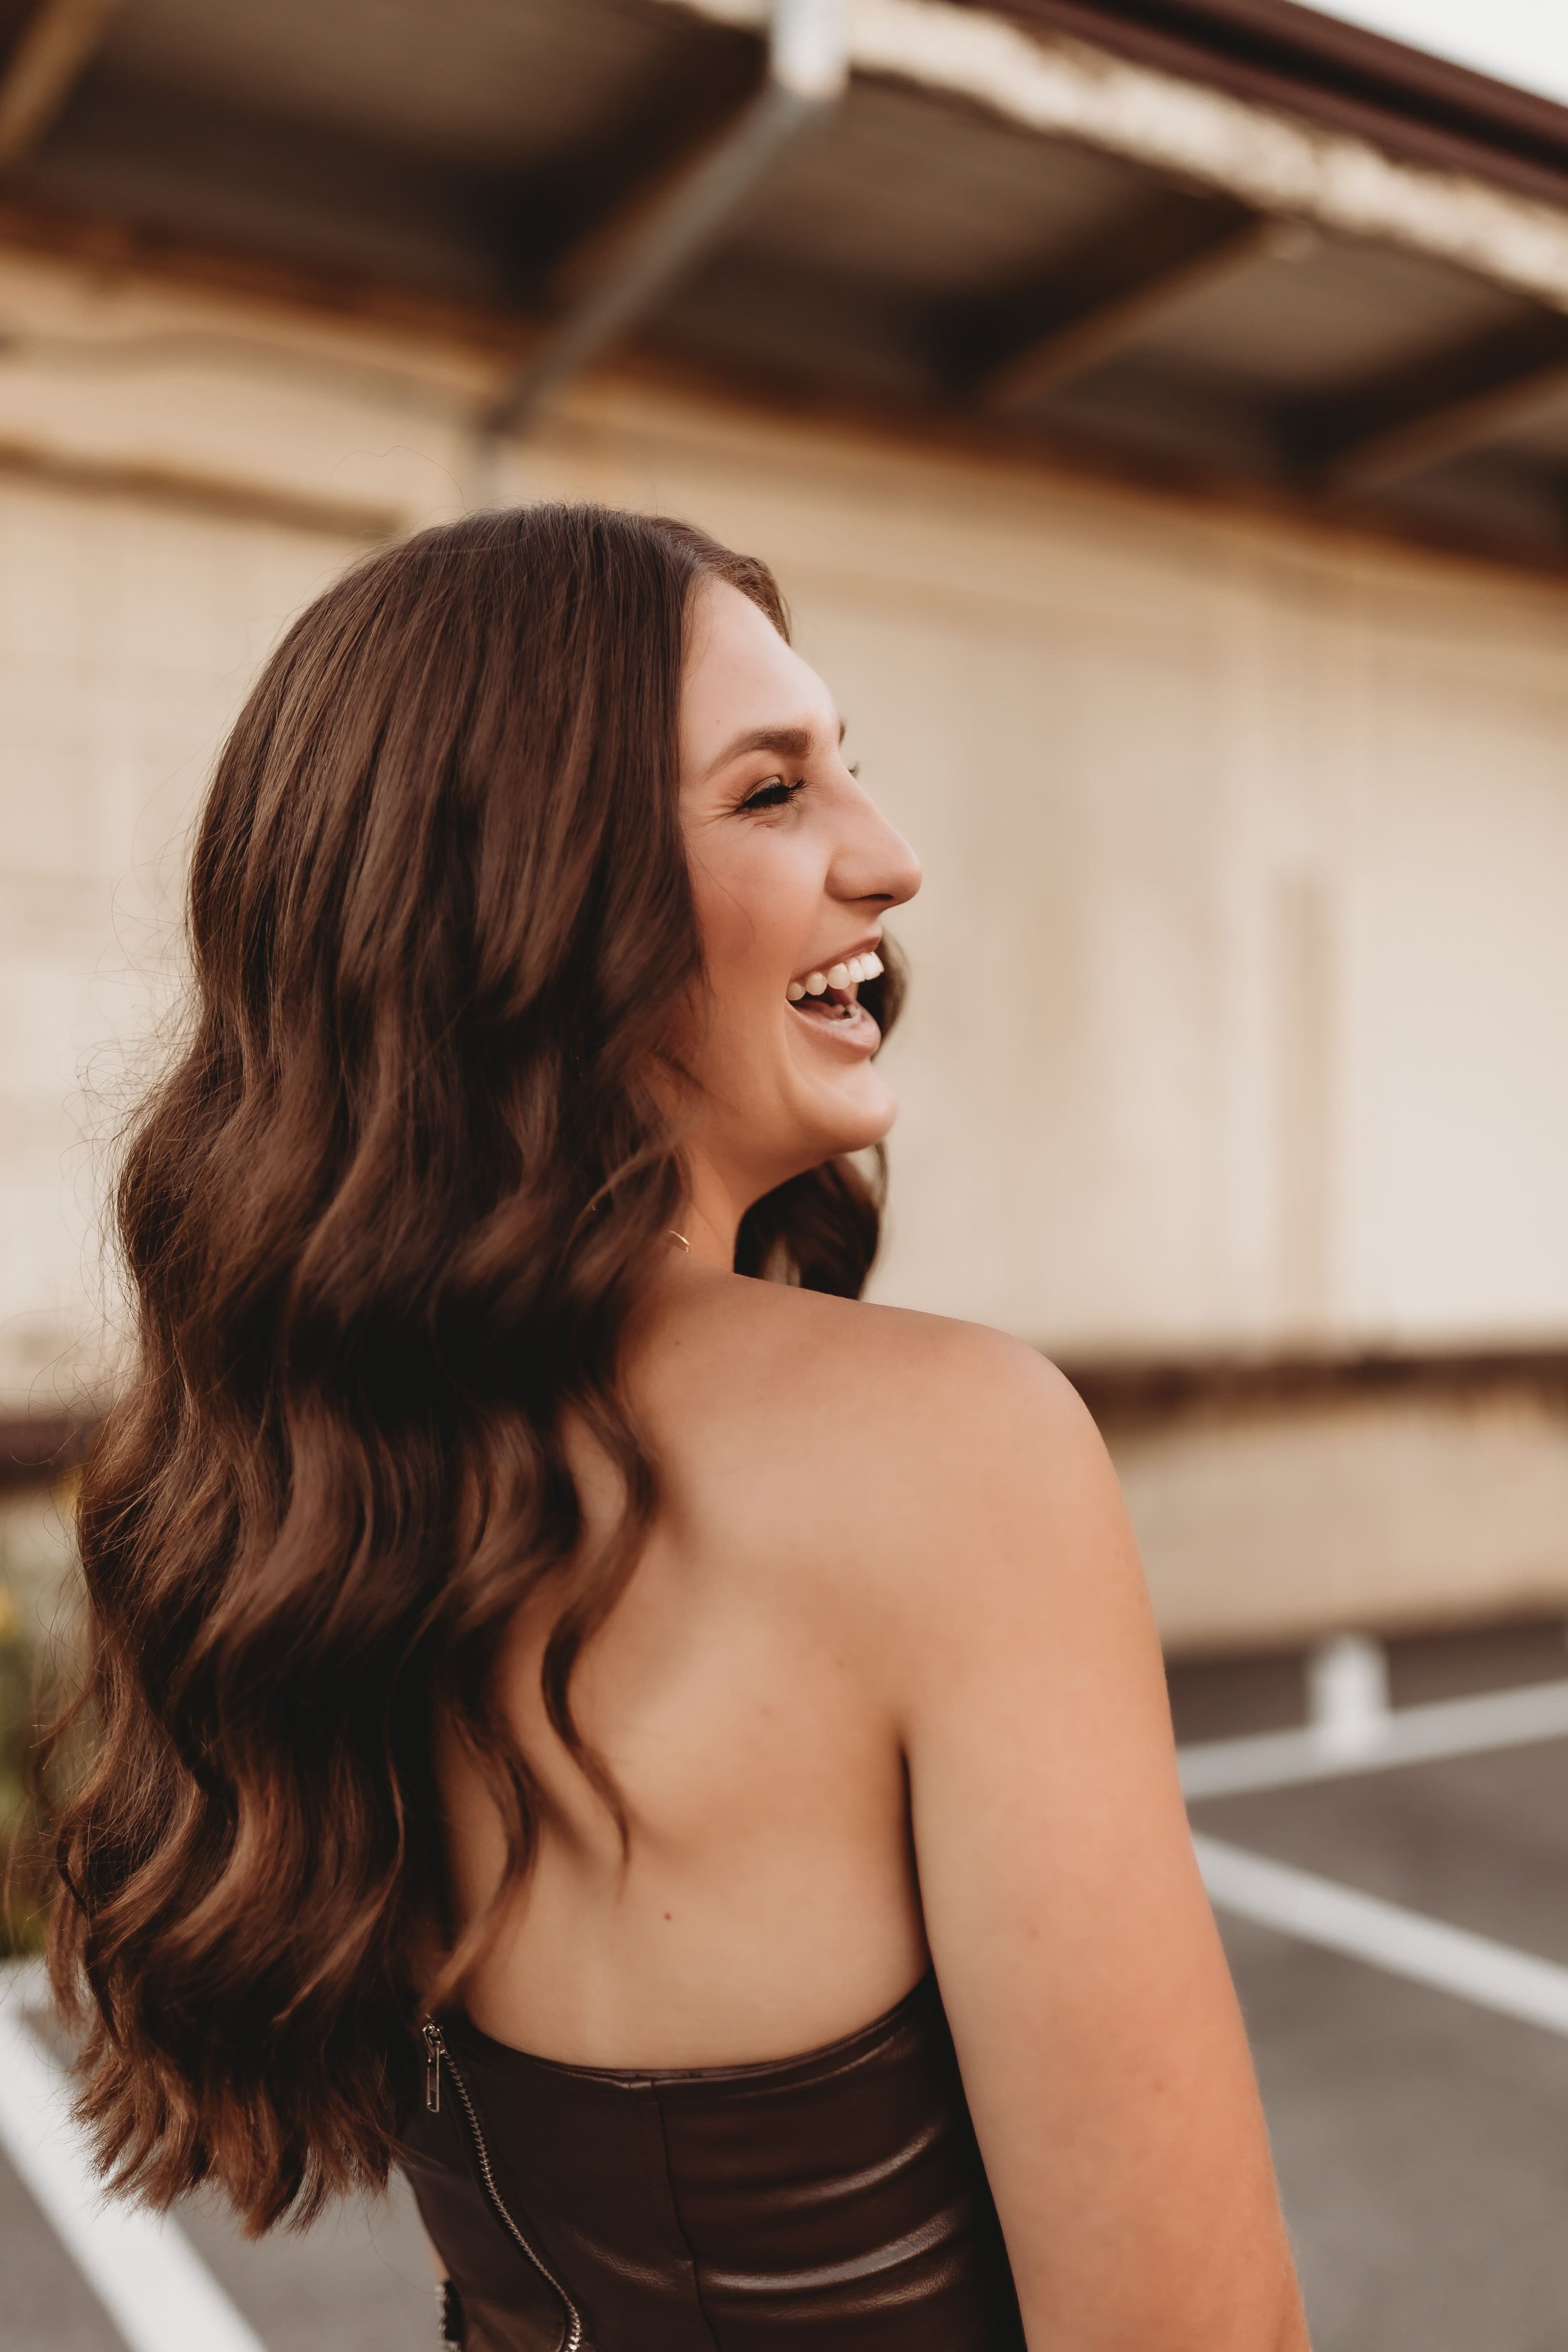  Out of all senior picture photographers Katy chose always flourishing photography seen here laughing with her long brown curls falling over her shoulder as she stands in front of an industrial building 